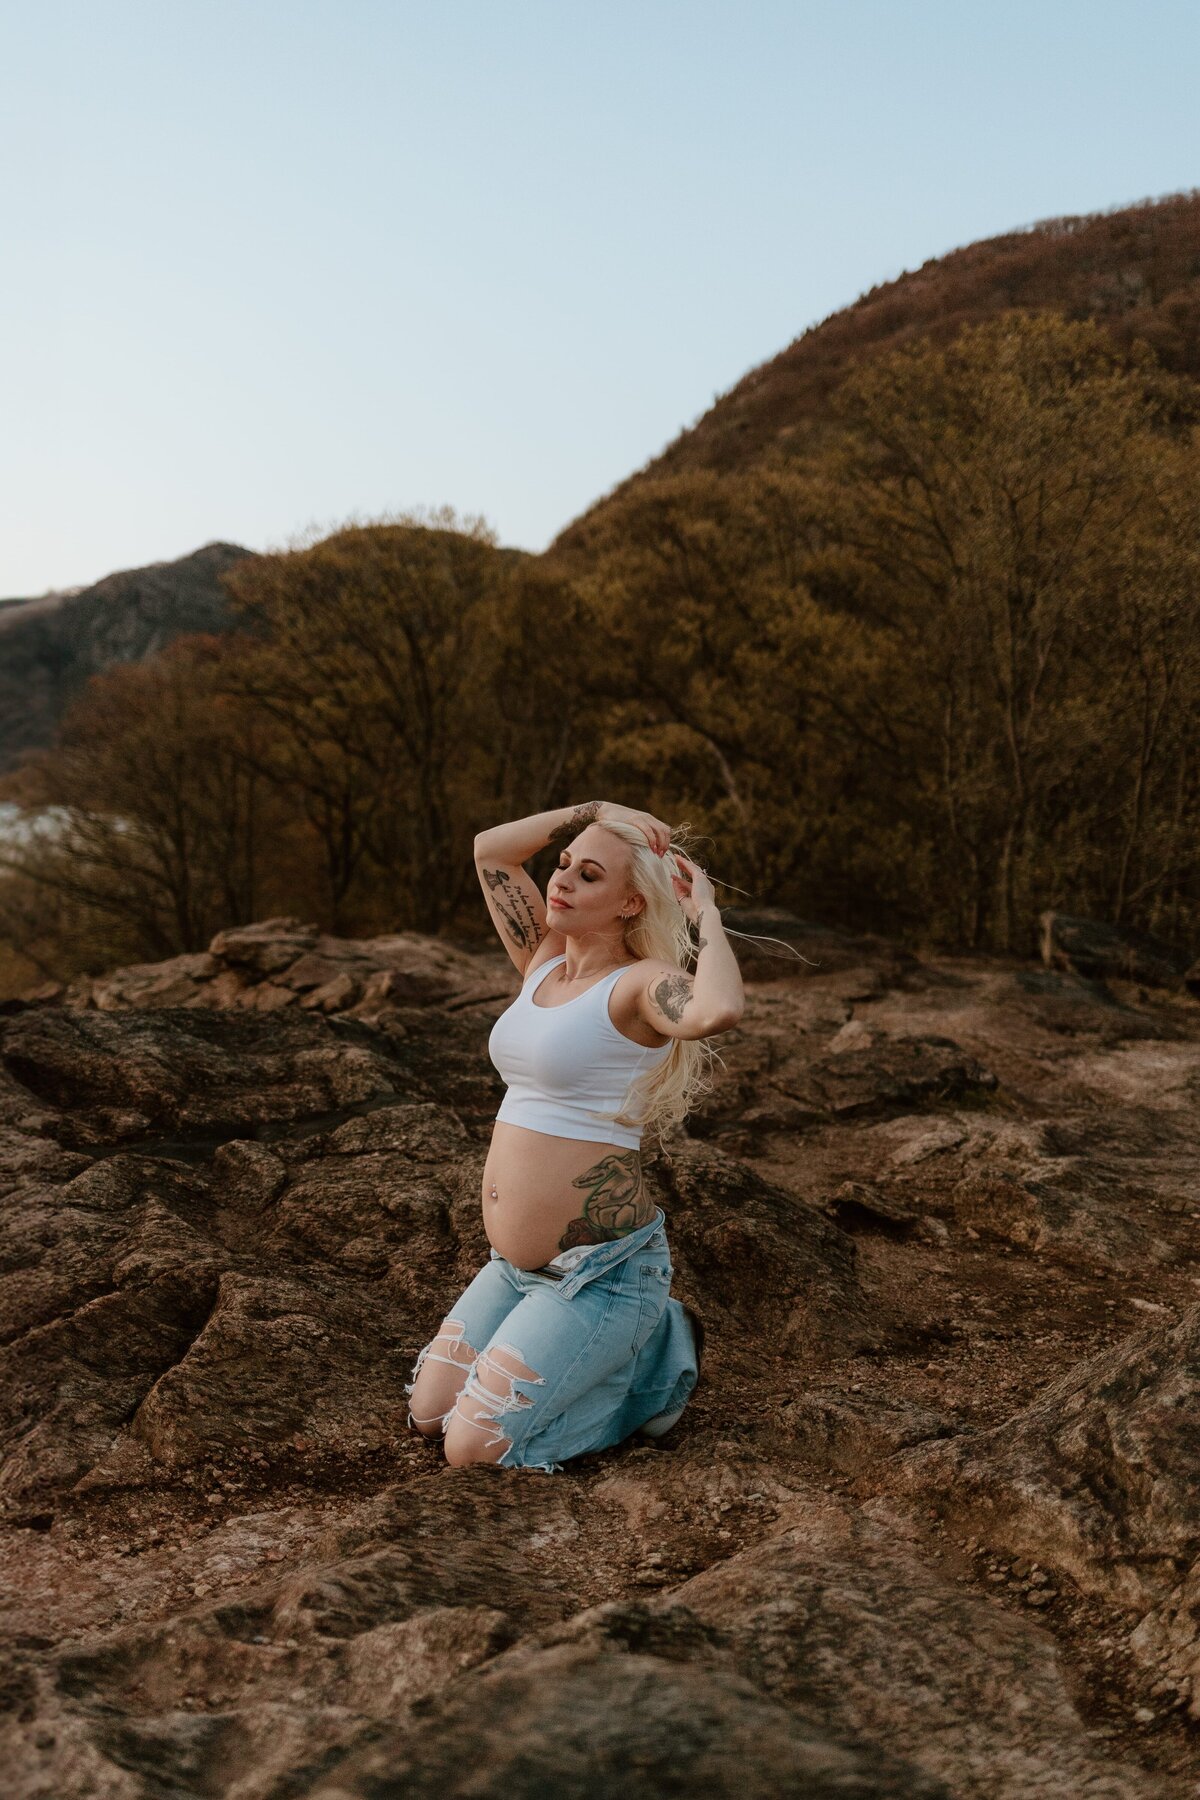 Pregnant woman with blonde hair and tattoos posing confidently on rocky terrain at Little Stony Point, Cold Spring. She is wearing a white tank top and distressed jeans, with her hands gently touching her hair as she enjoys the serene natural backdrop.